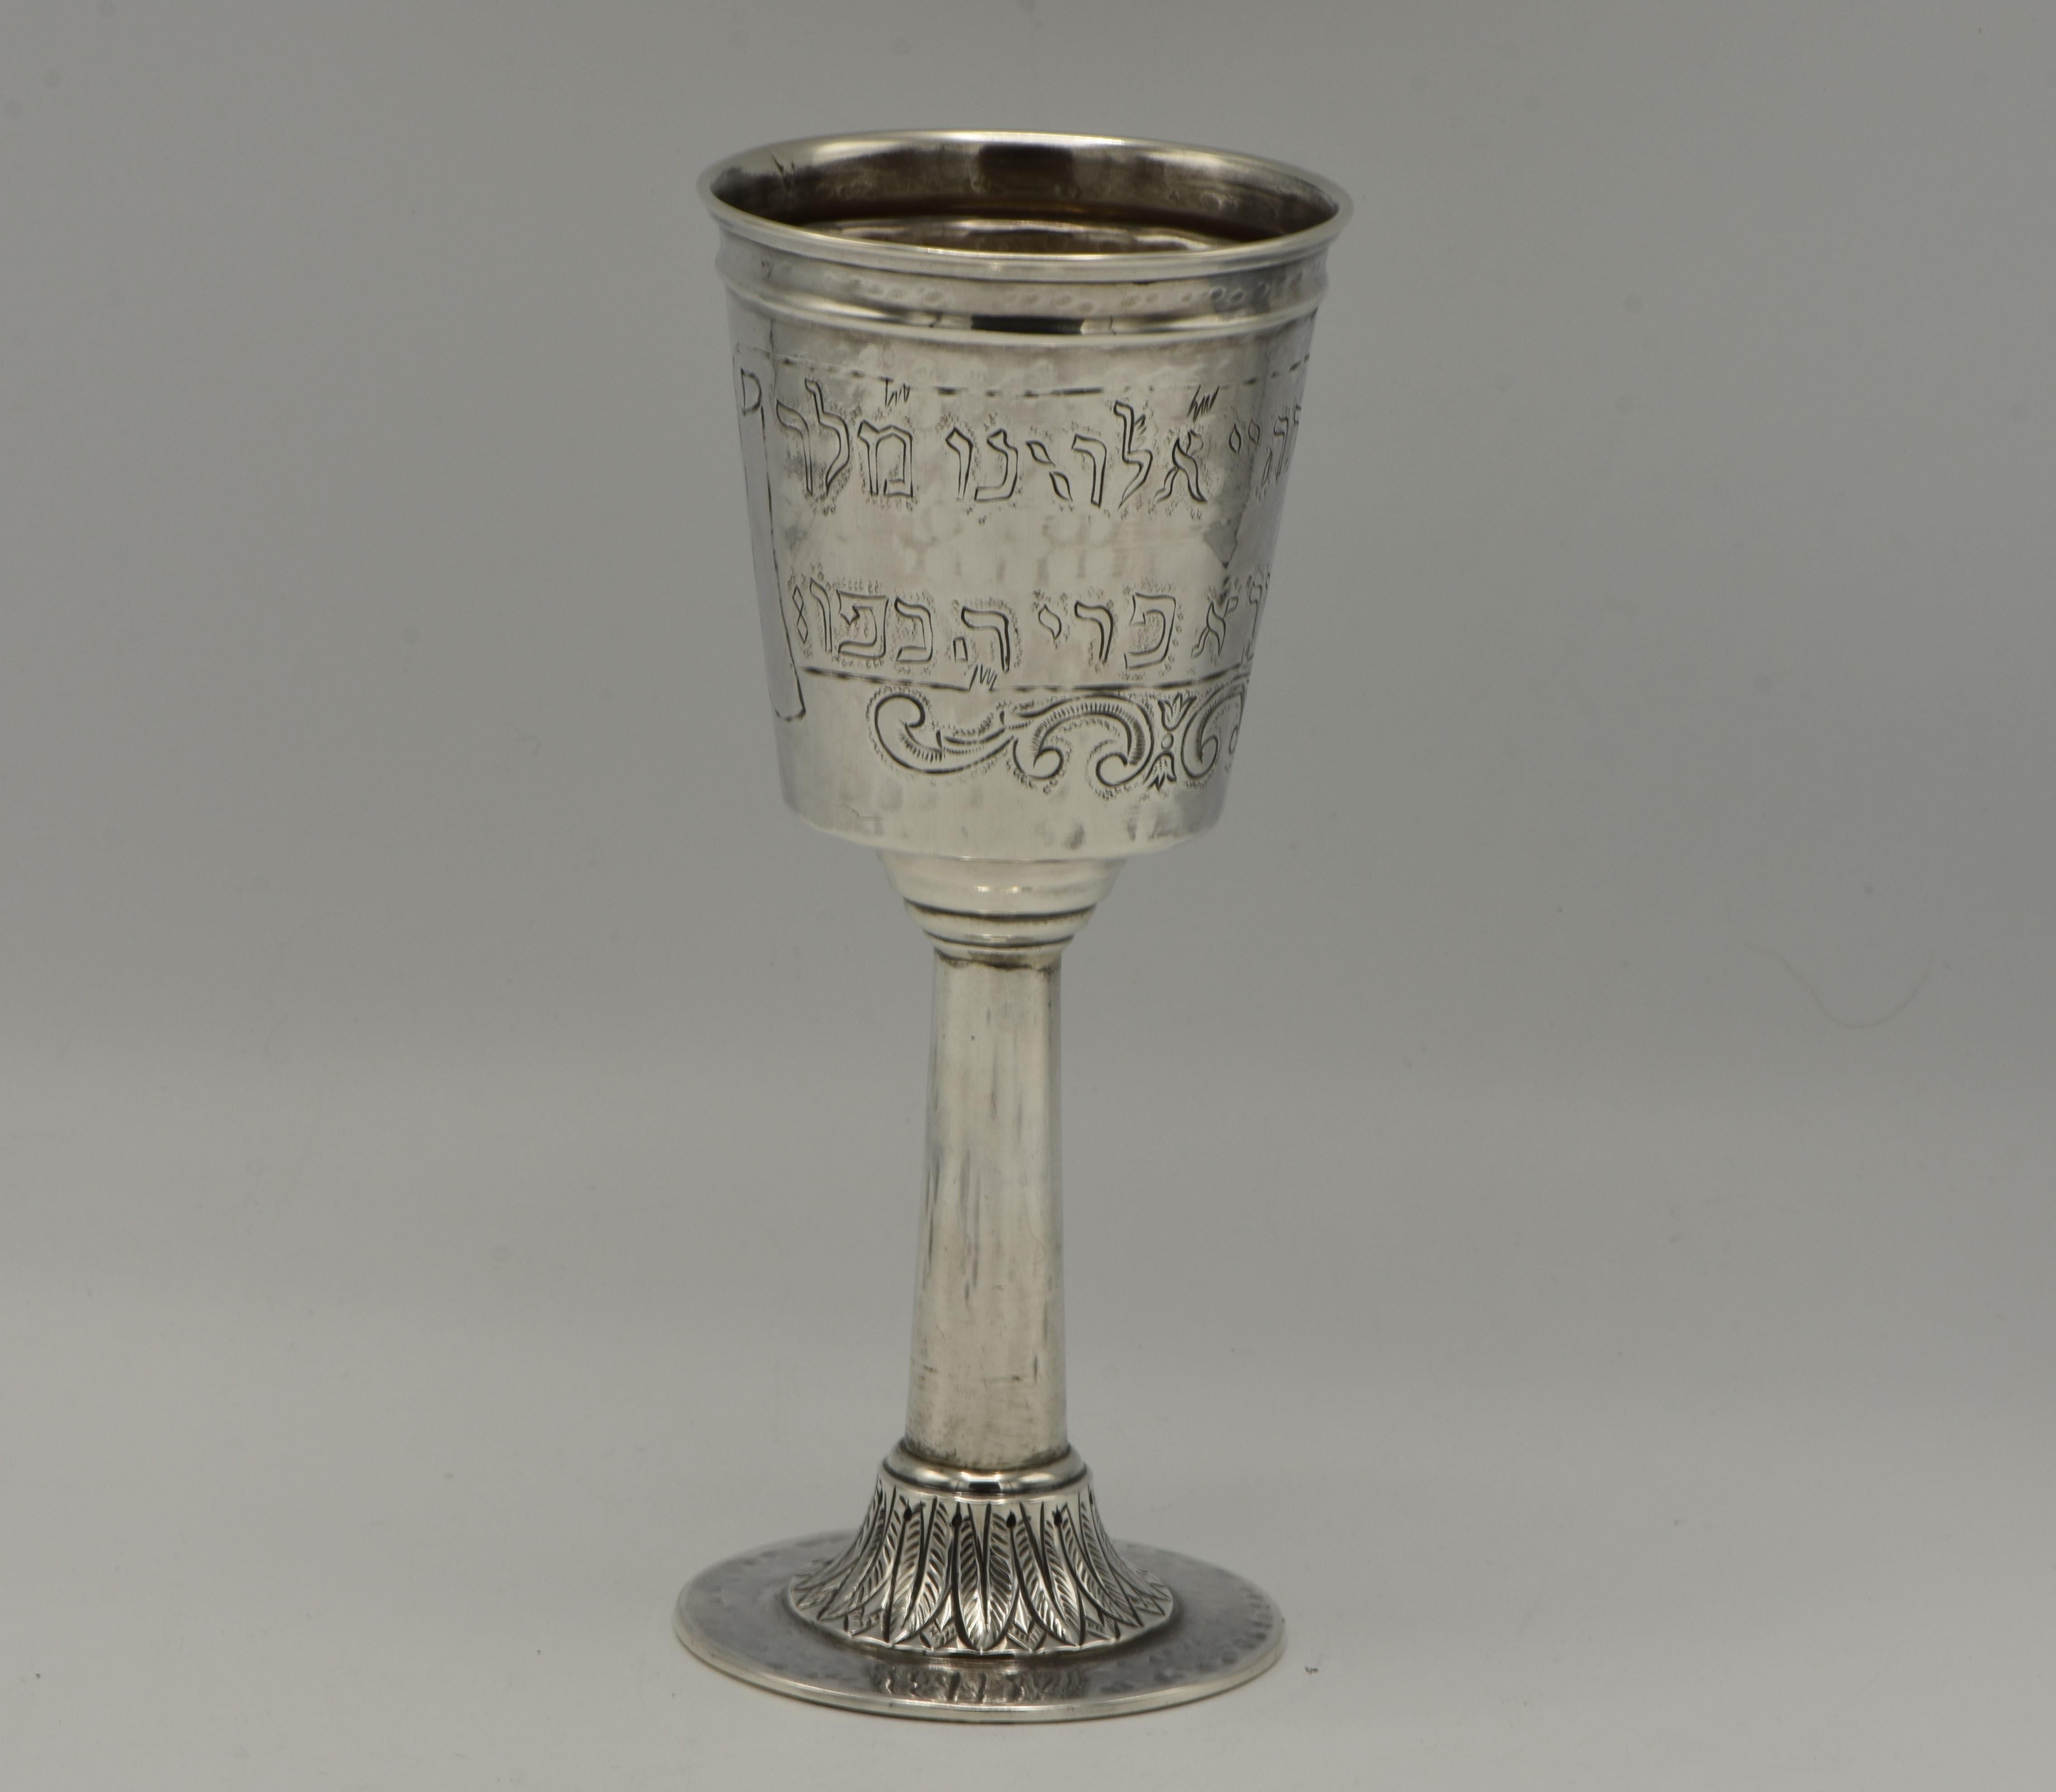 Hand-hammered silver Kiddush goblet, Moshe Smilovici, Tel Aviv, Israel, circa 1950. 
On round base engraved with leaves and tall stem. Upper wine section is engraved with the temple Menorah and with the blessing for the wine in Hebrew.
Moshe